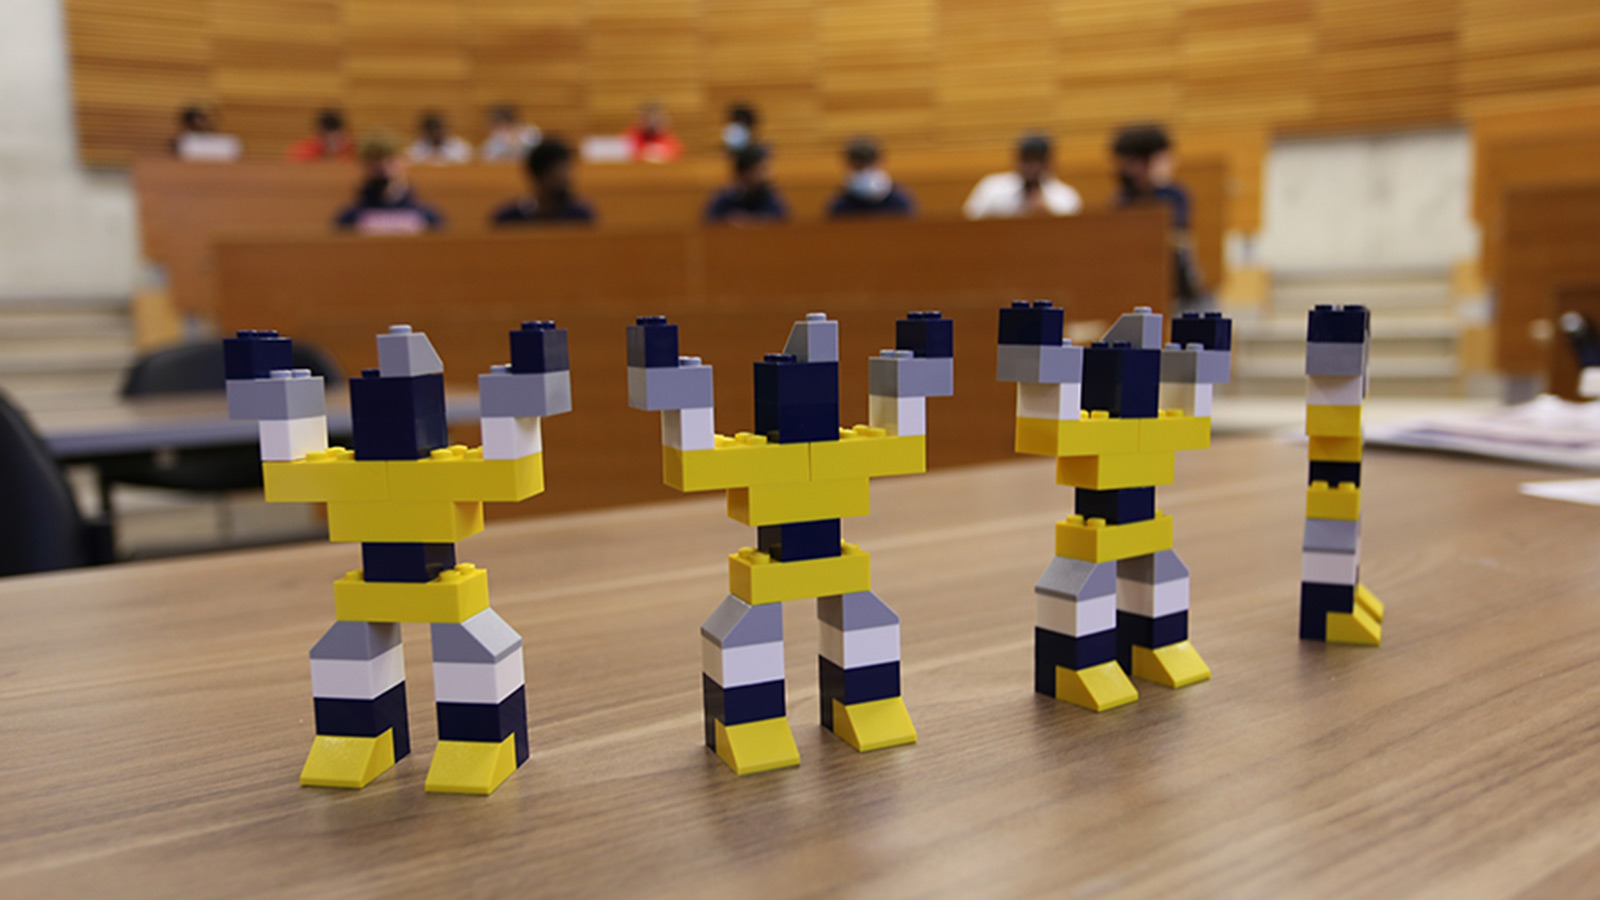 Robots made out of Lego lined up on a table